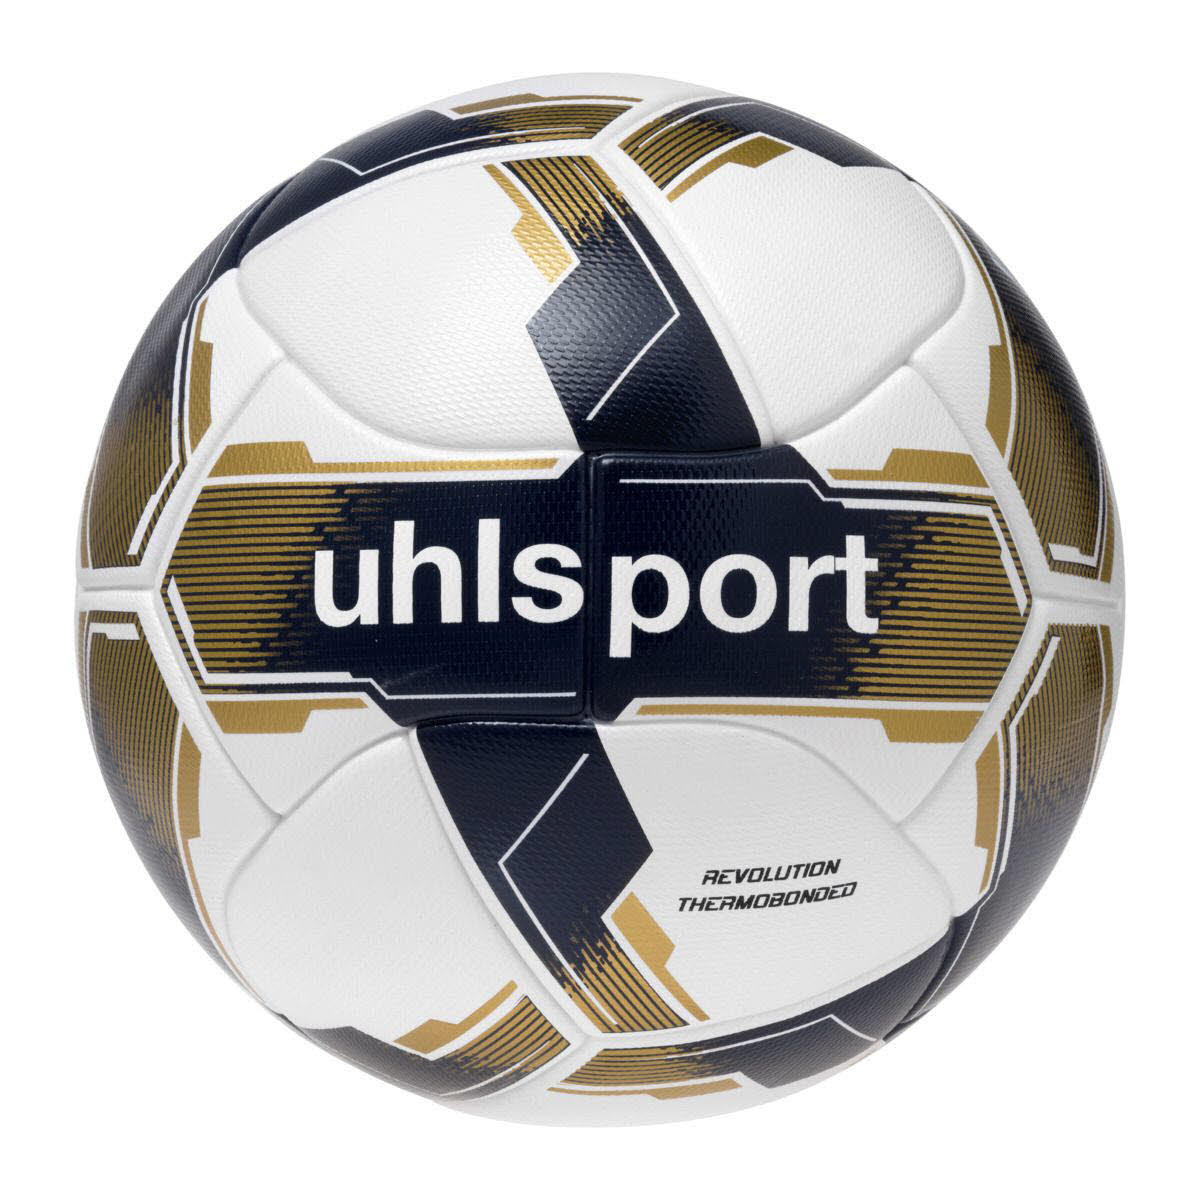 Uhlsport Revolution Thermobonded